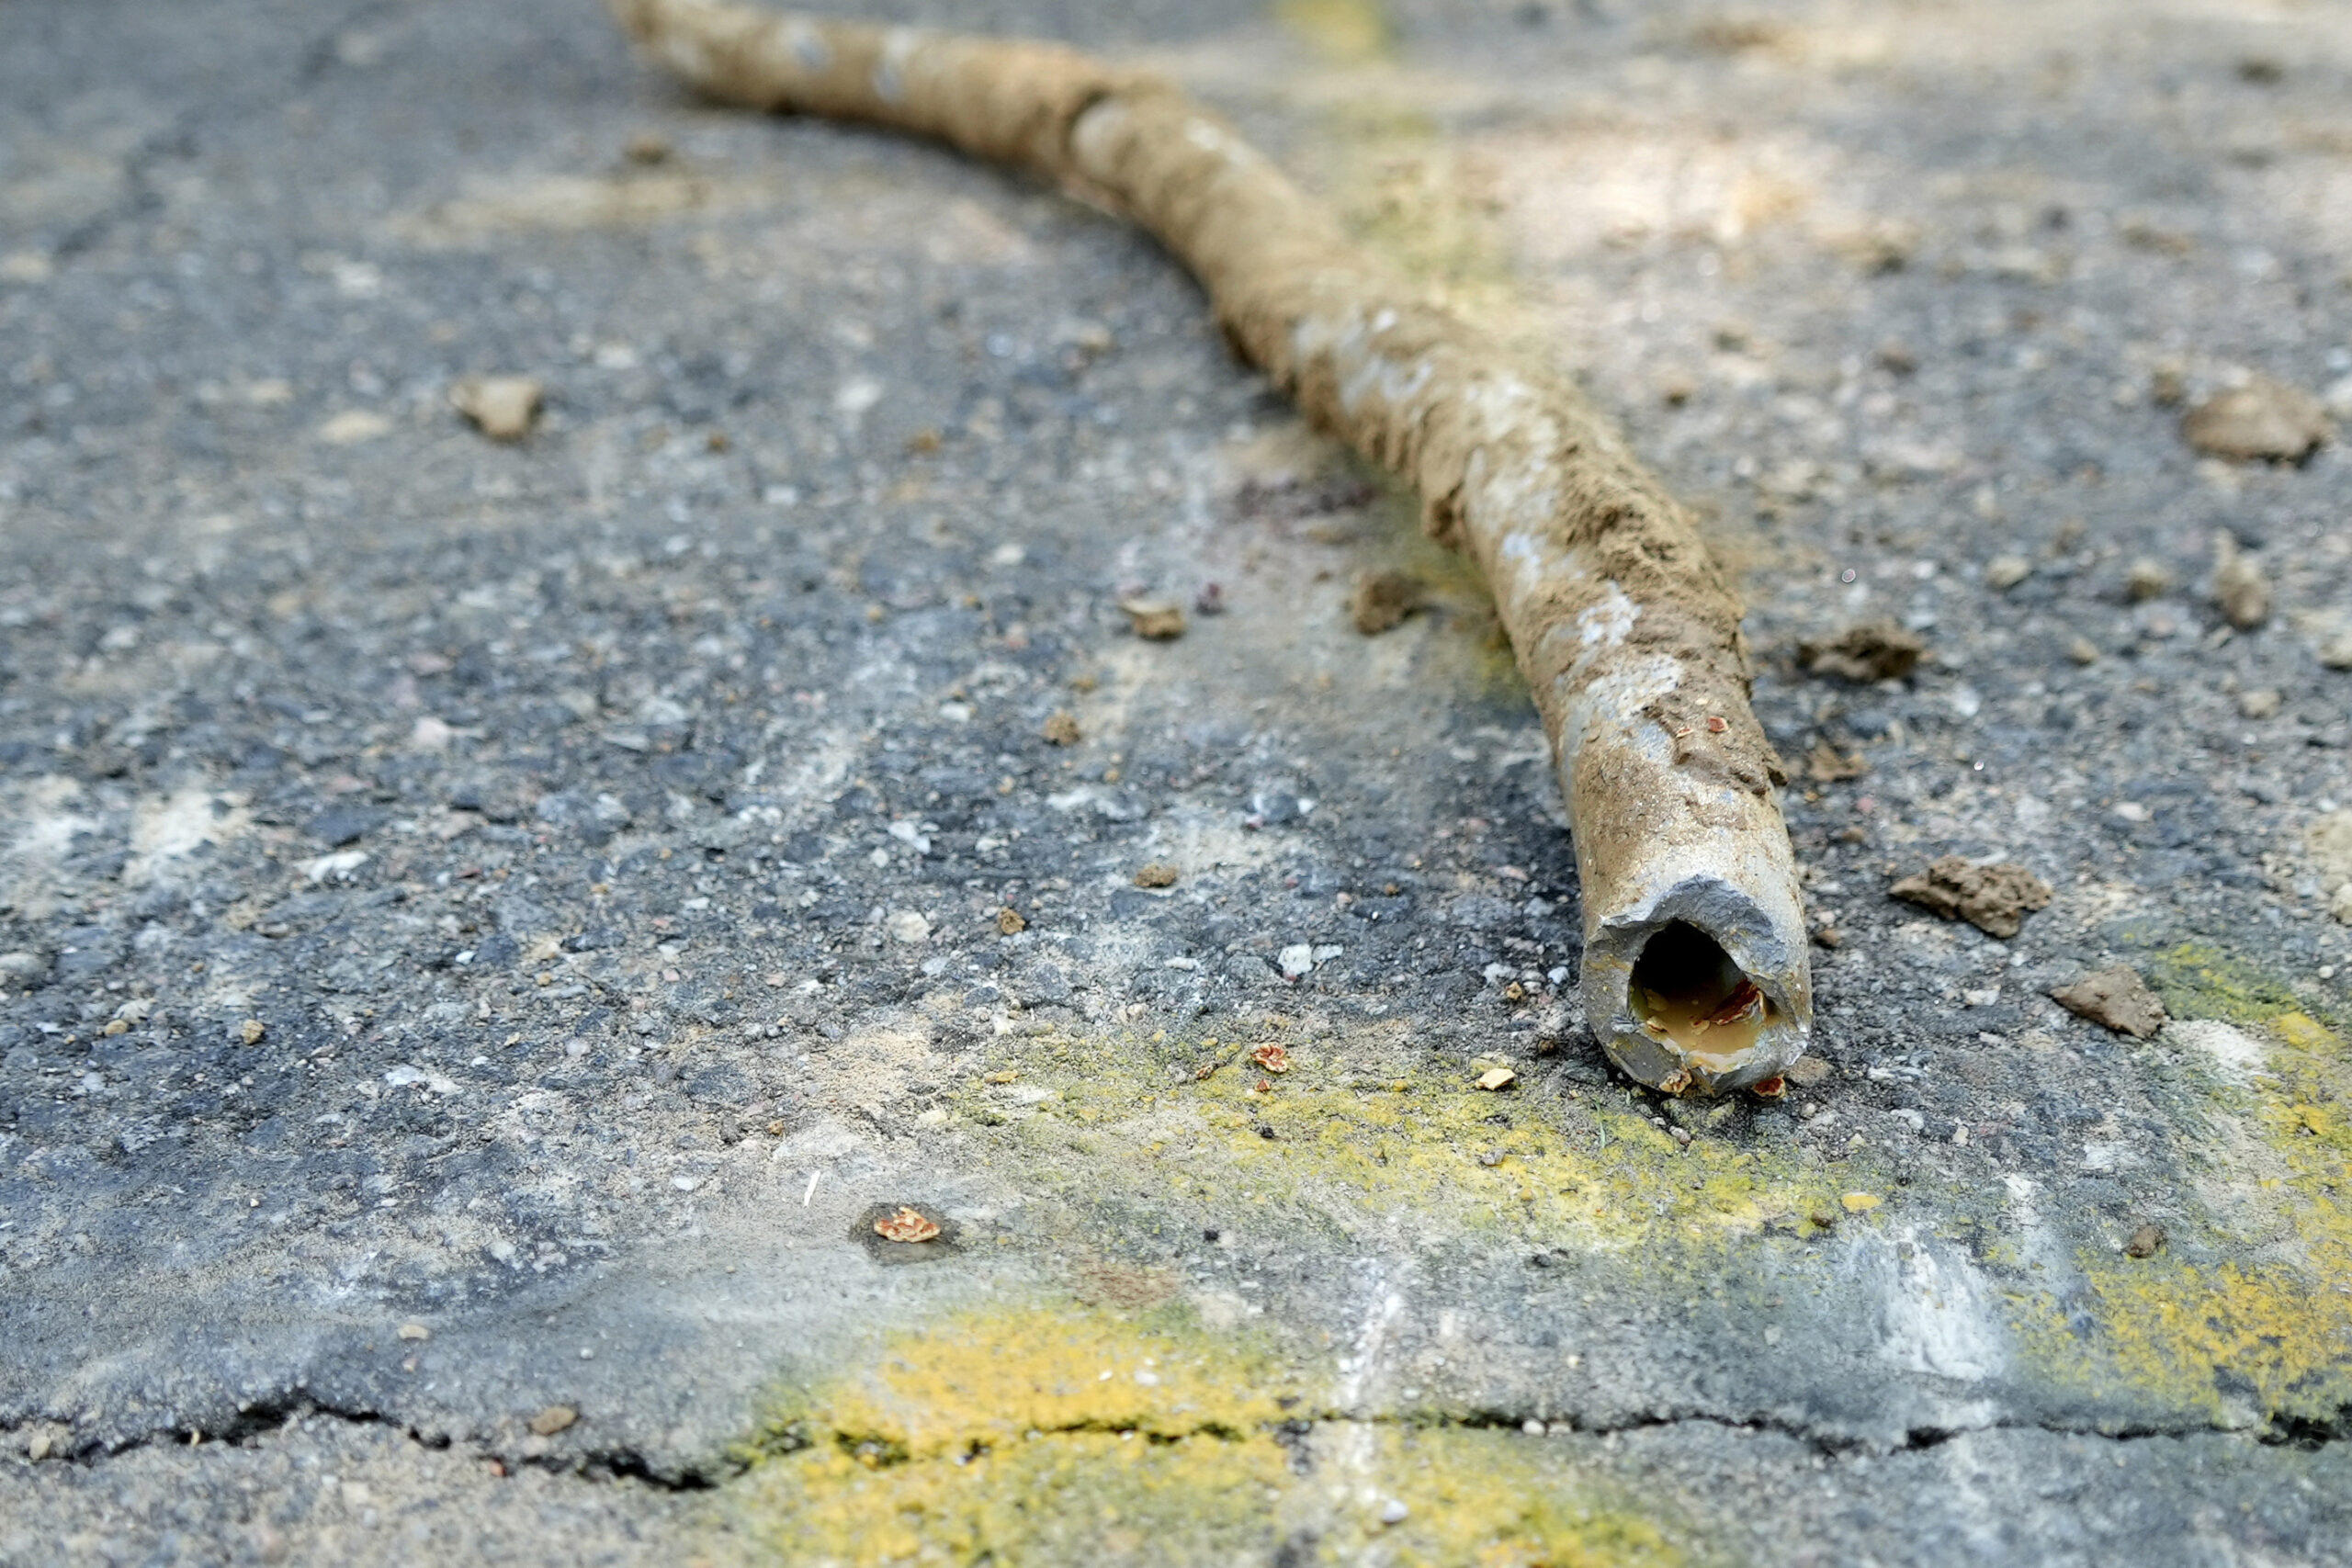 An old lead pipe lying on blacktop